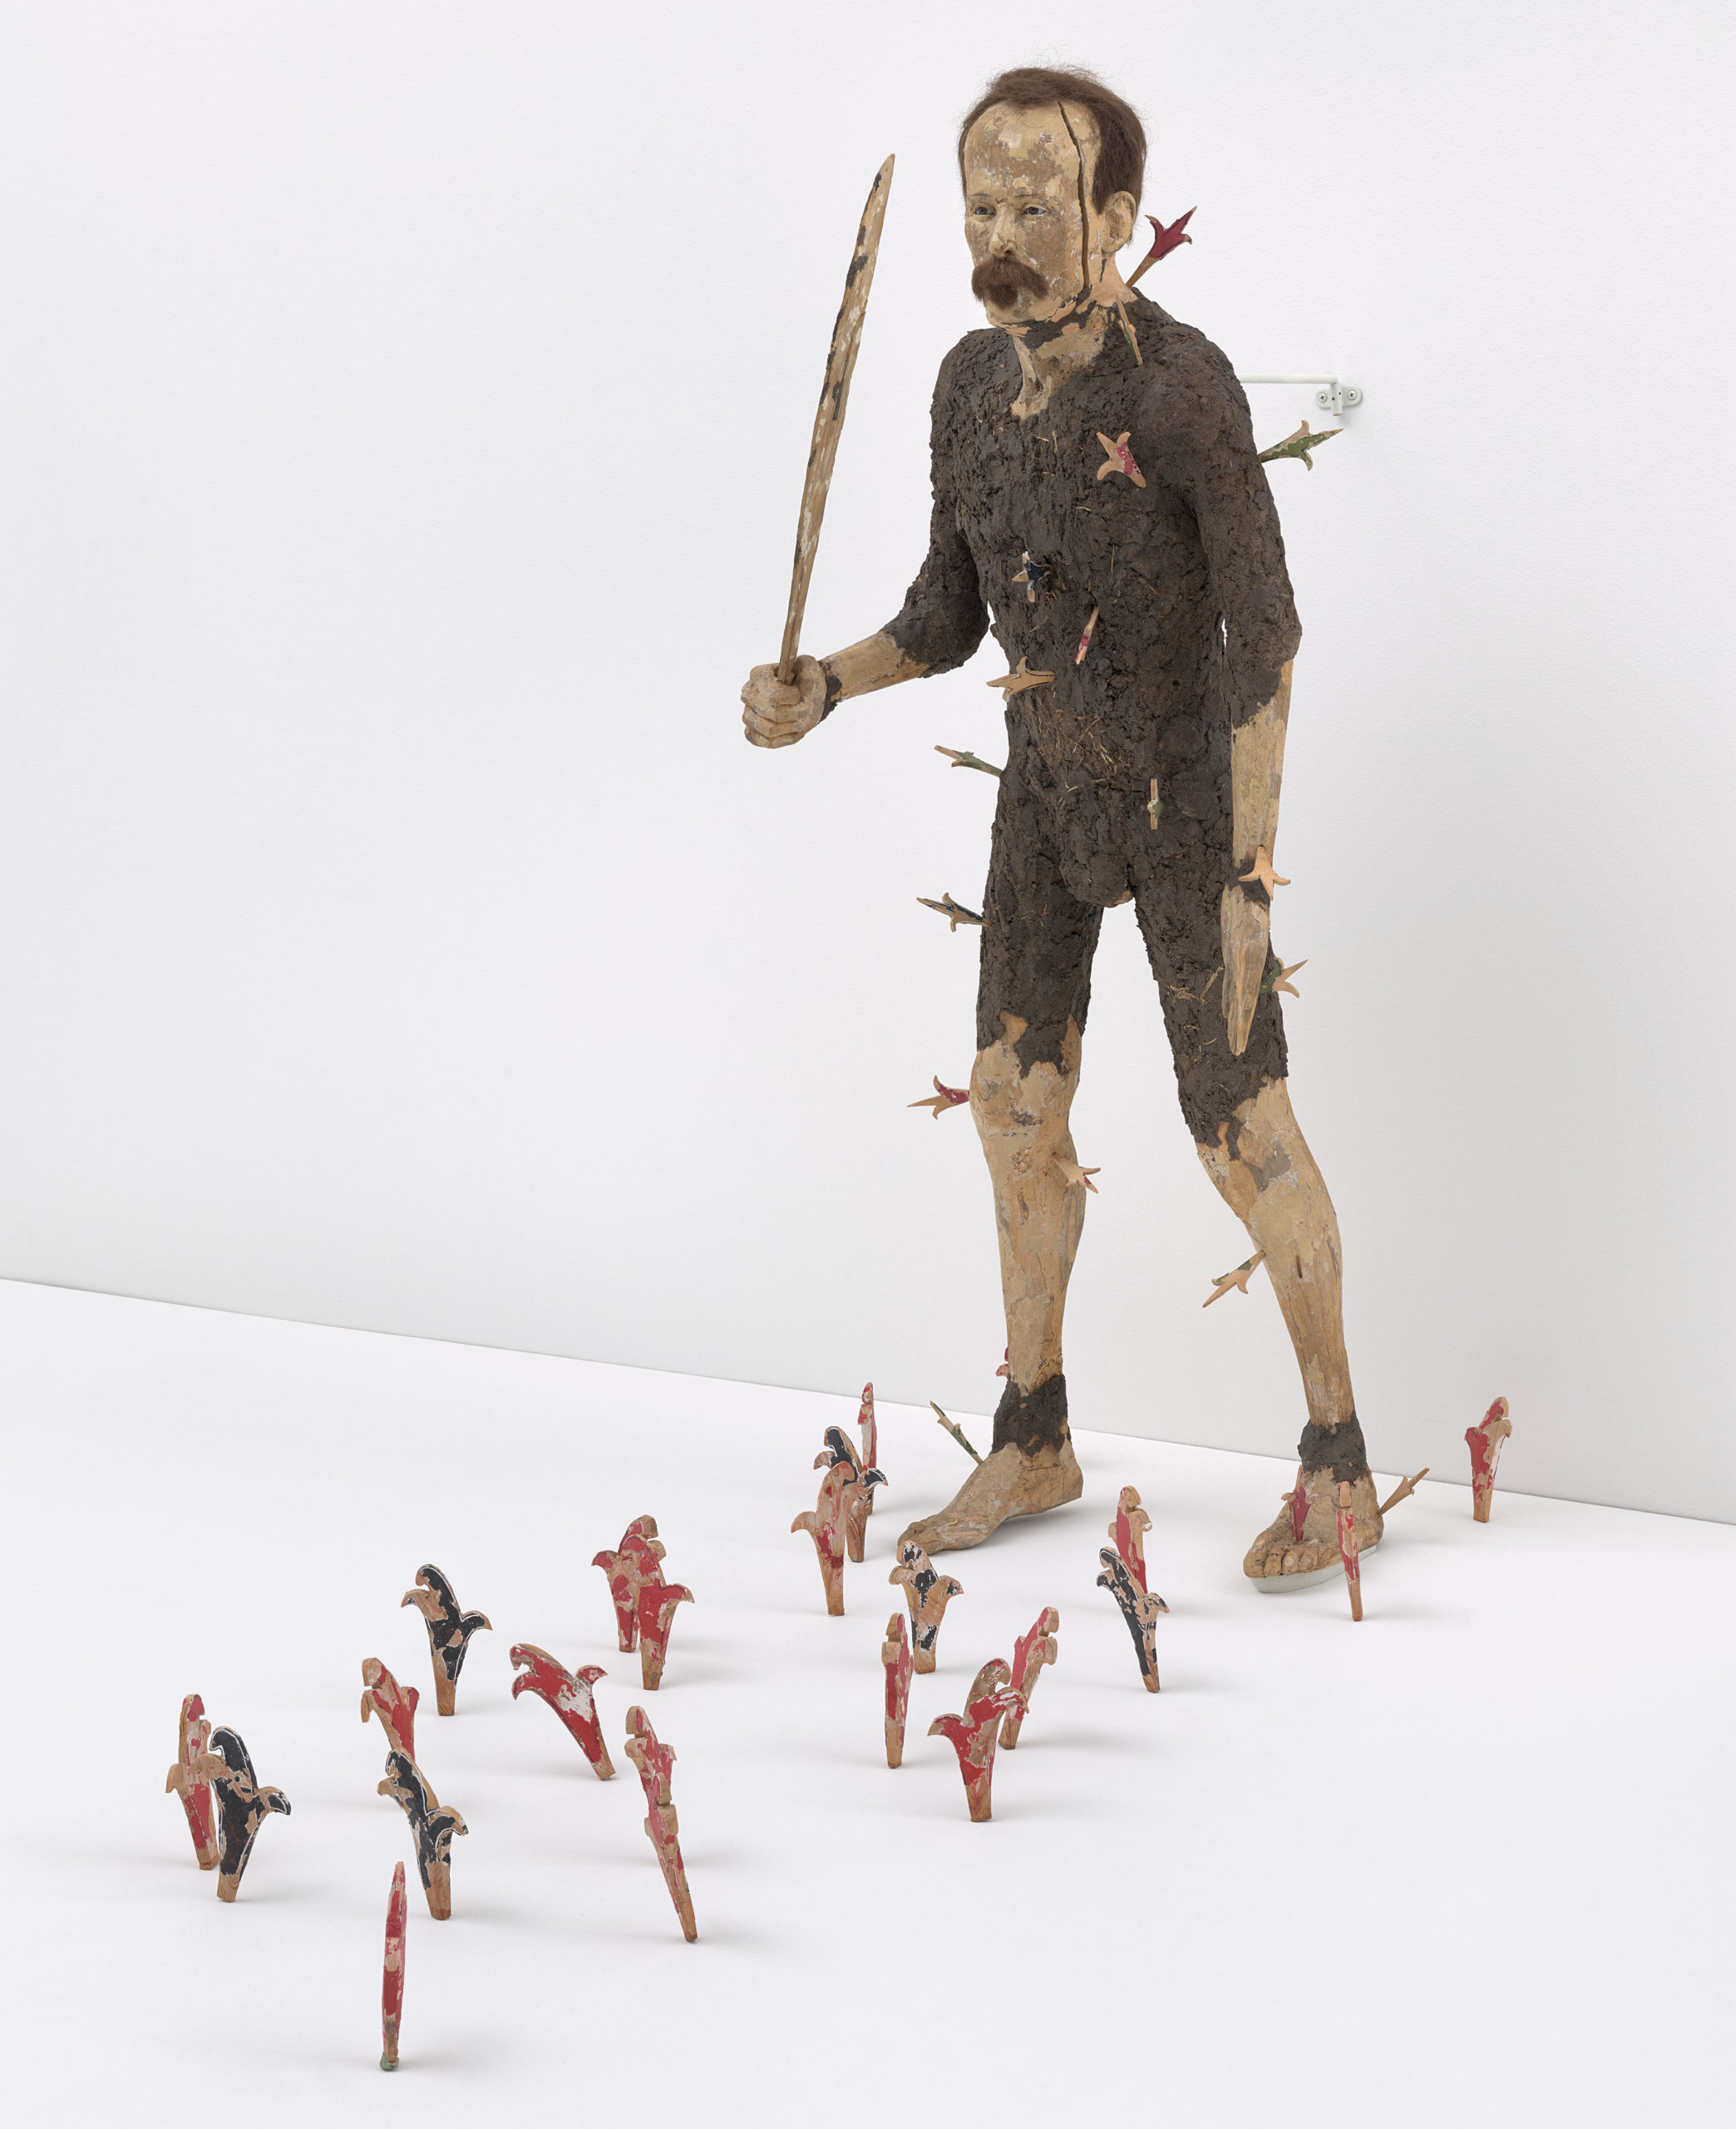 Juan Francisco Elso, Por América (José Martí), 1986. Wood, plaster, earth, pigment, synthetic hair, and glass eyes. Courtesy of the Hirshhorn Museum and Sculpture Garden, Smithsonian Institution, Washington, DC, Joseph H. Hirshhorn Purchase Fund, 1998. Photo: Ron Amstutz. Hirshhorn Museum and Sculpture Garden.